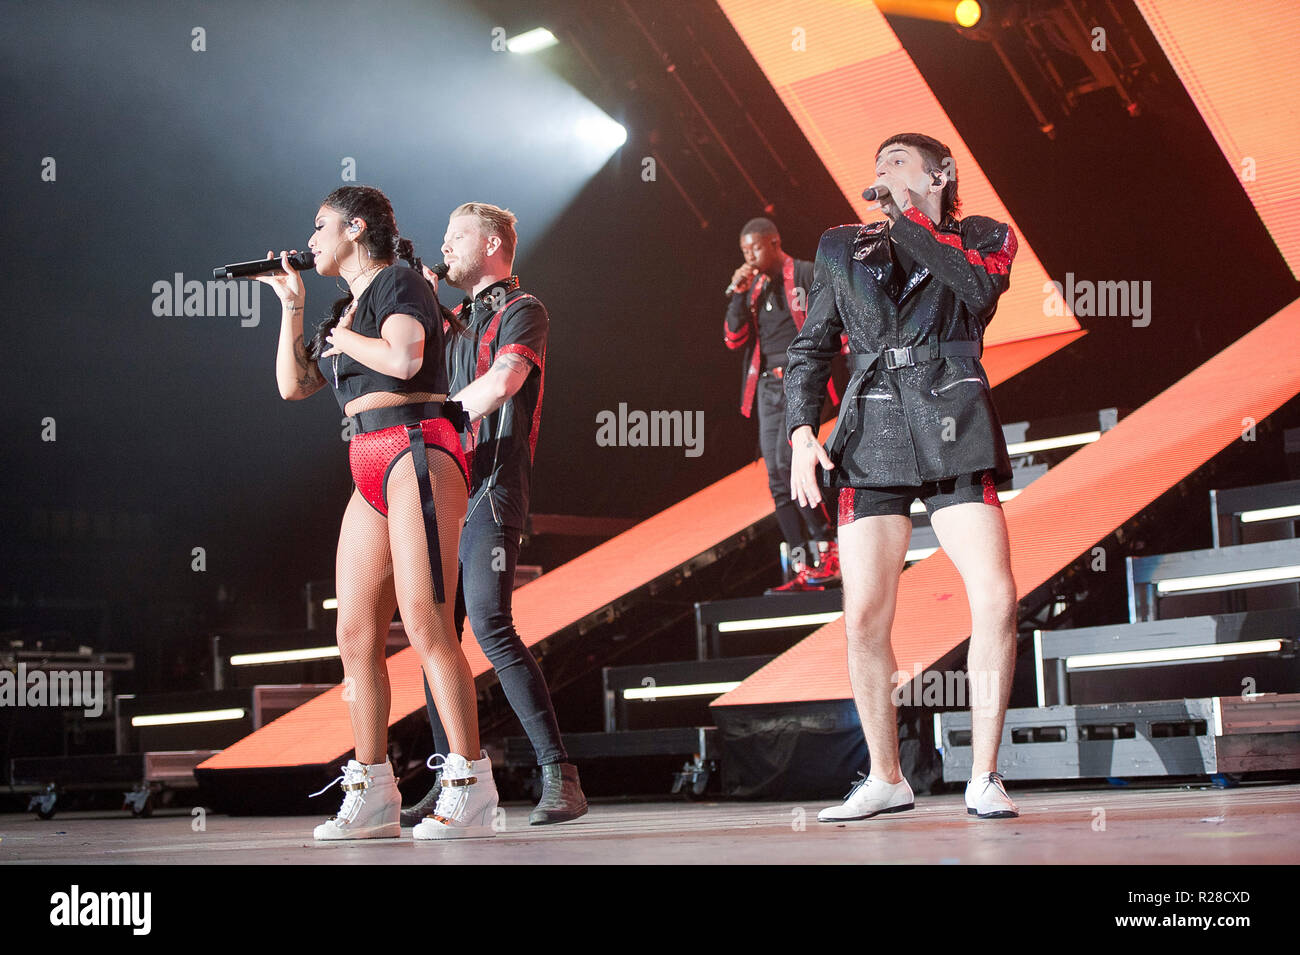 August 11, 2018 - Raleigh, North Carolina; USA - Singer KIRSTIN MALDONADO of PENTATONIX performs live as their 2018 tour makes a stop at the Coastal Credit Union Music Park at Walnut Creek located in Raleigh Copyright 2018 Jason Moore. Credit: Jason Moore/ZUMA Wire/Alamy Live News Stock Photo